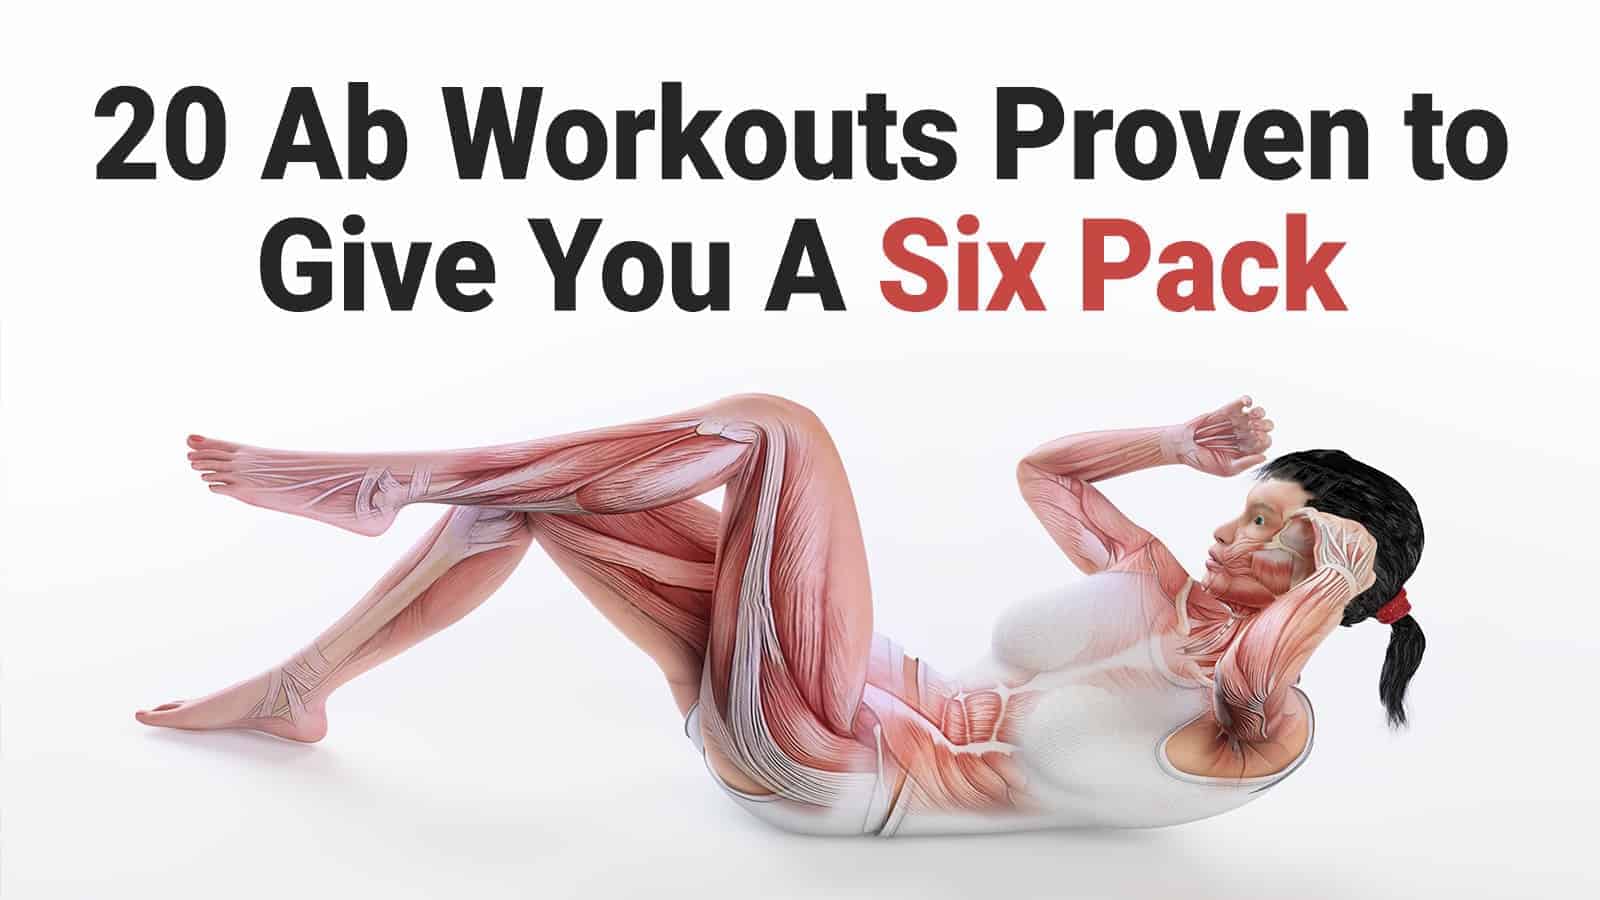 20 Ab Workouts Proven to Give You A Six Pack